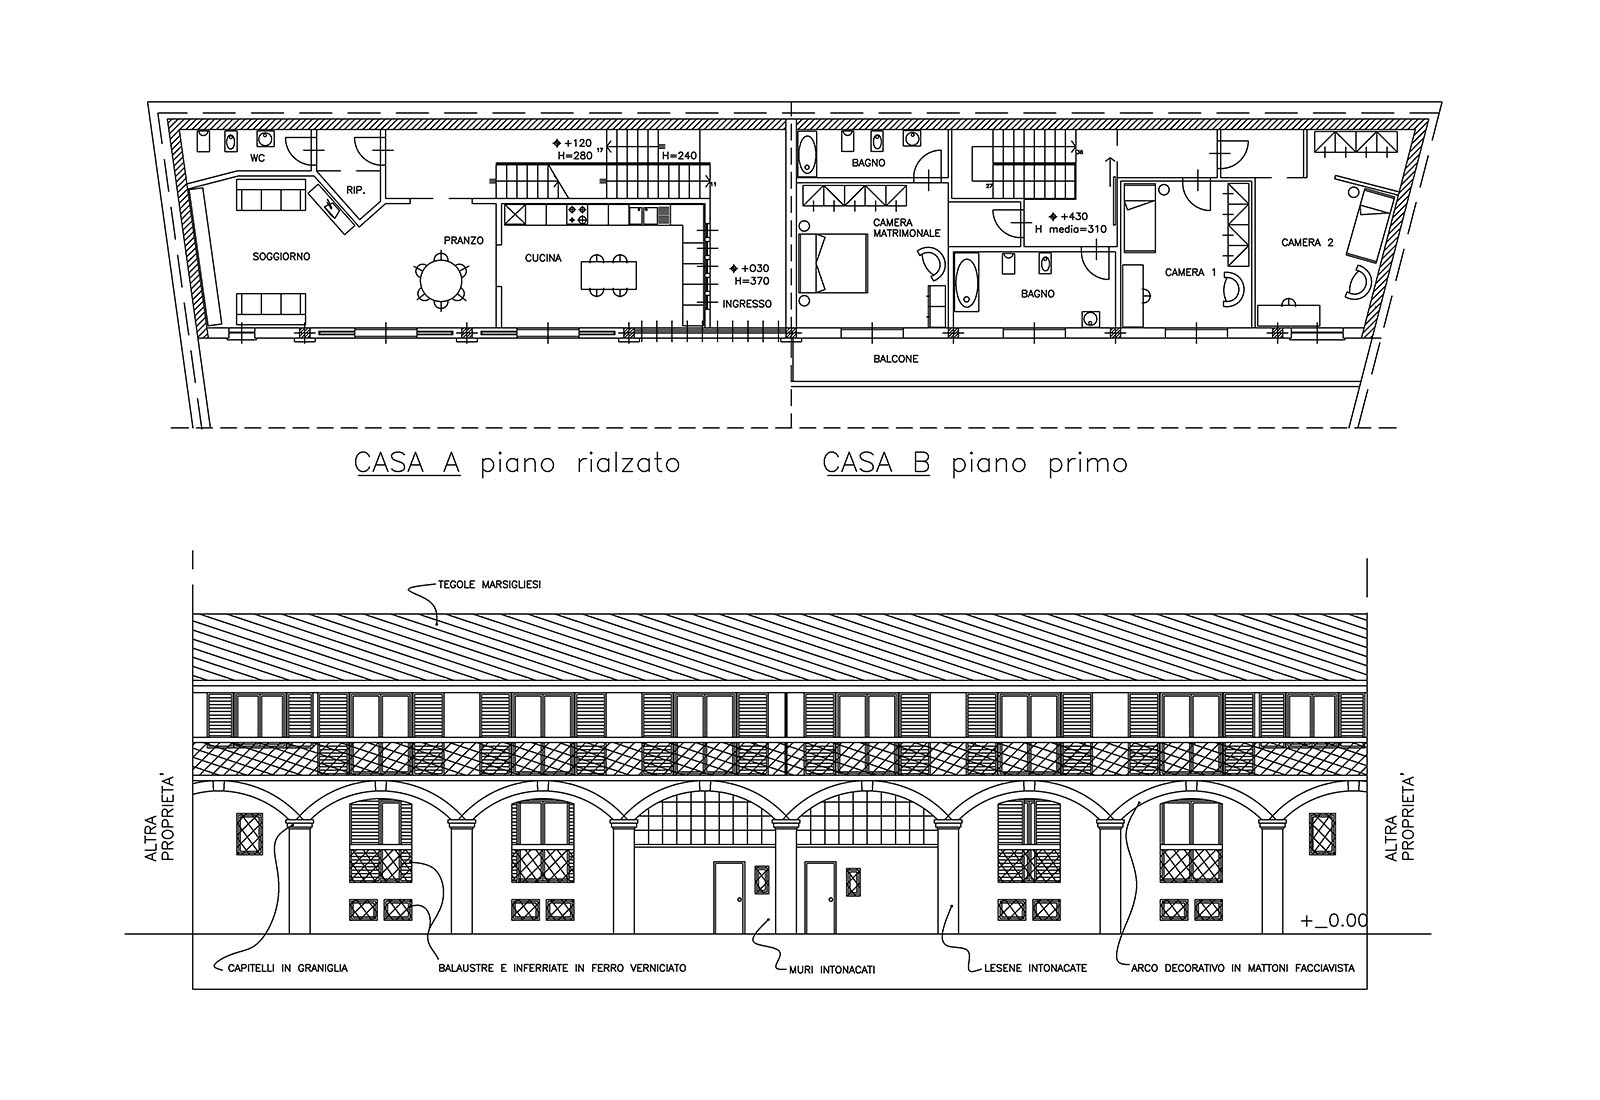 Residential building in Garibaldi street in Rho - Typological plans and elevation